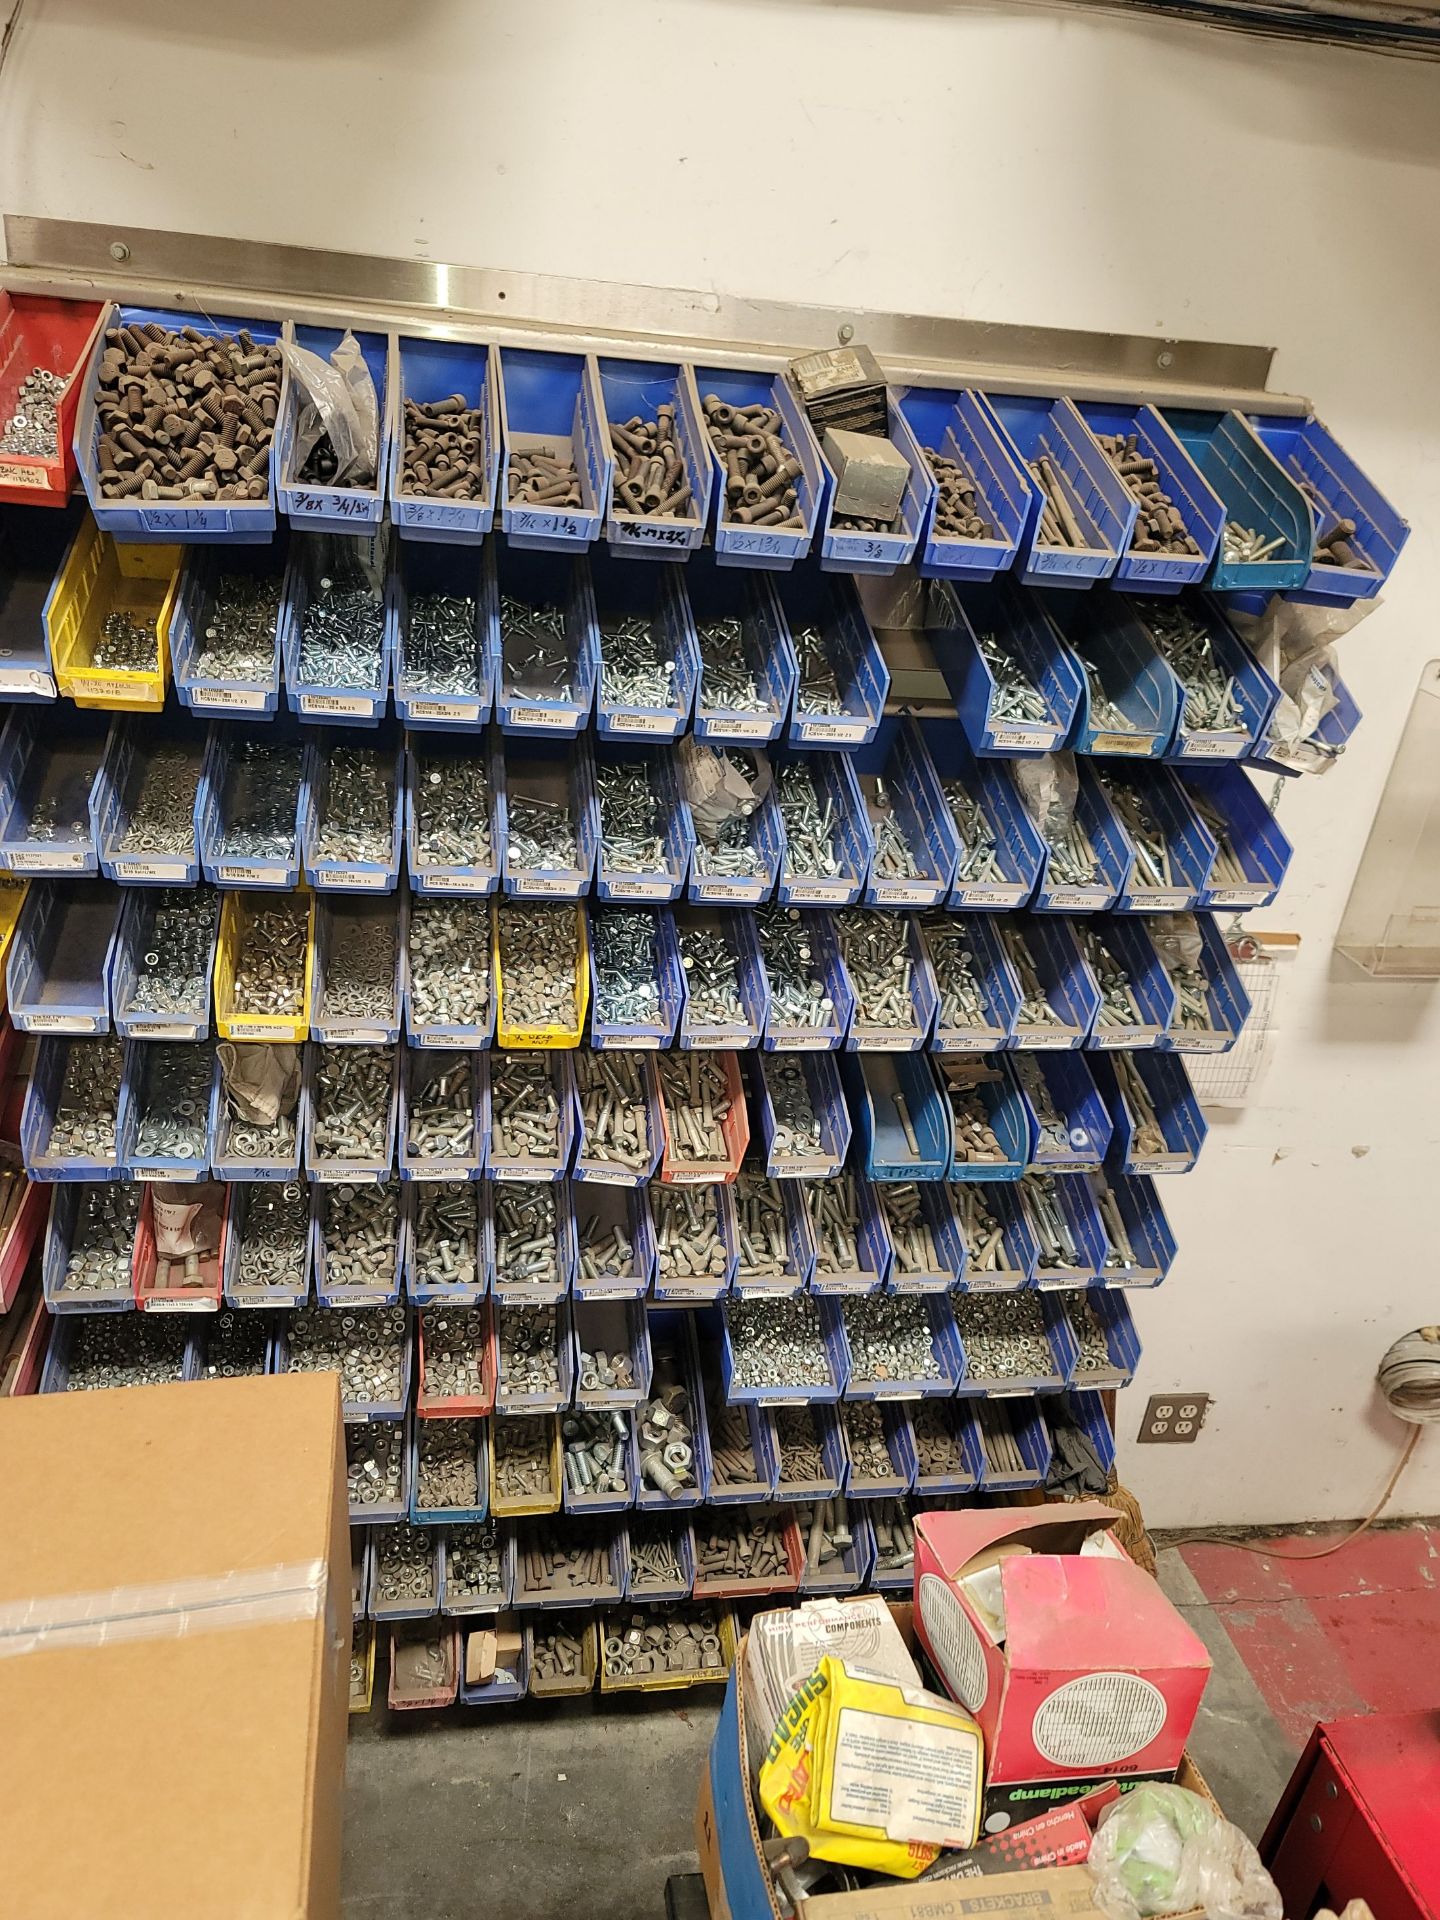 LOT - LARGE QUANTITY OF BOLTS, NUTS, WASHERS, IN BINS ON WALL RACK, RACK INCLUDED - Image 4 of 4